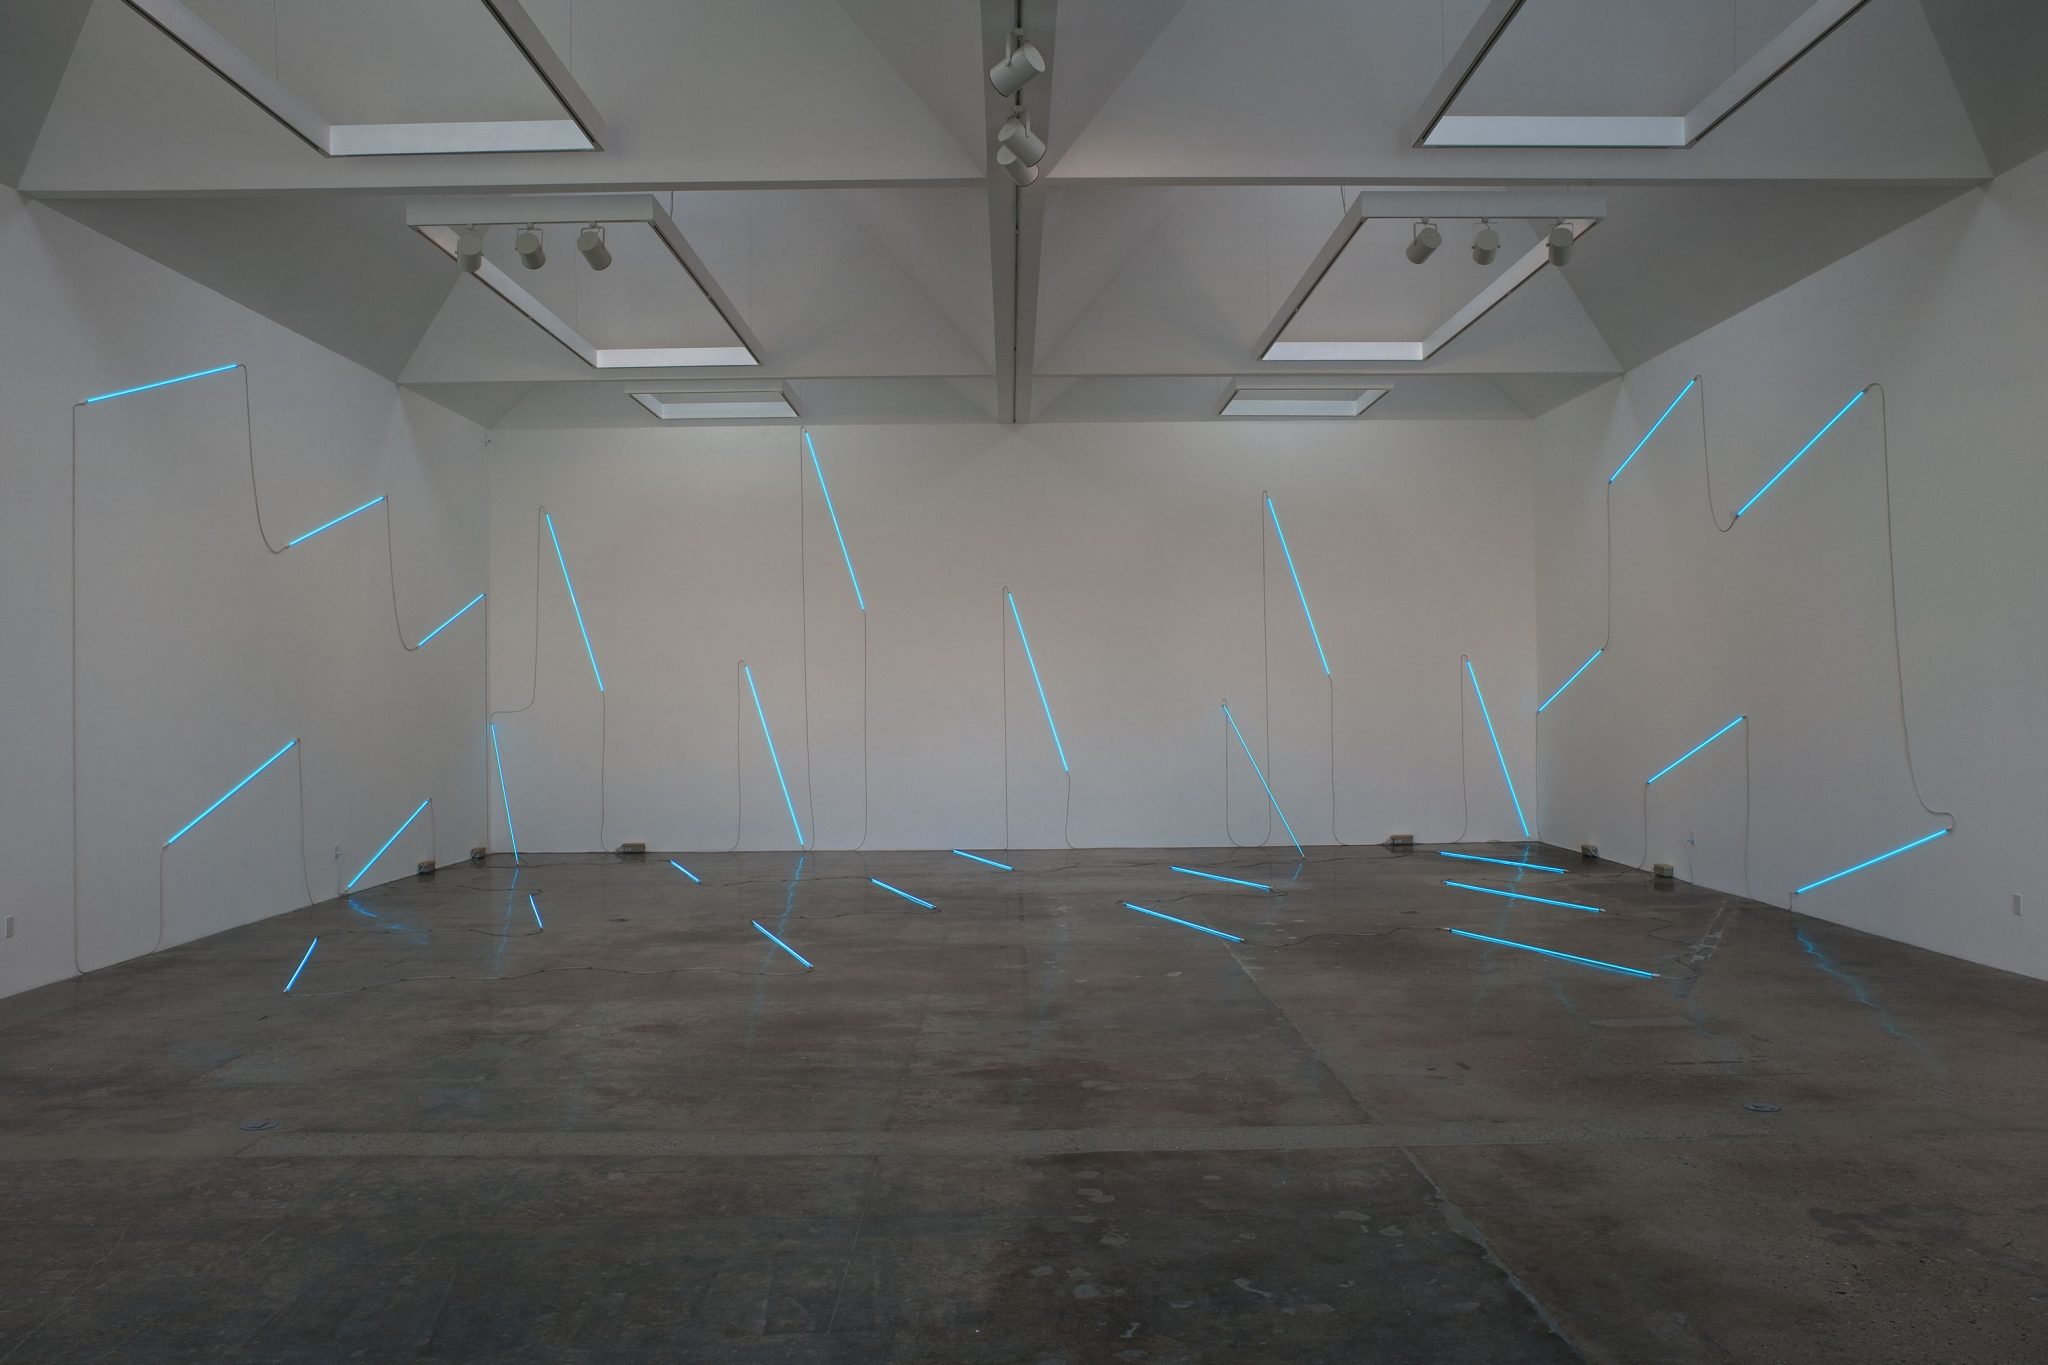 No End Neon, 2013, 29 200 cm blue neon tubes and transformers, dimensions variable. Photo: Robert Wedemeyer. Courtesy the artist and Kayne Griffin Corcoran, Los Angeles